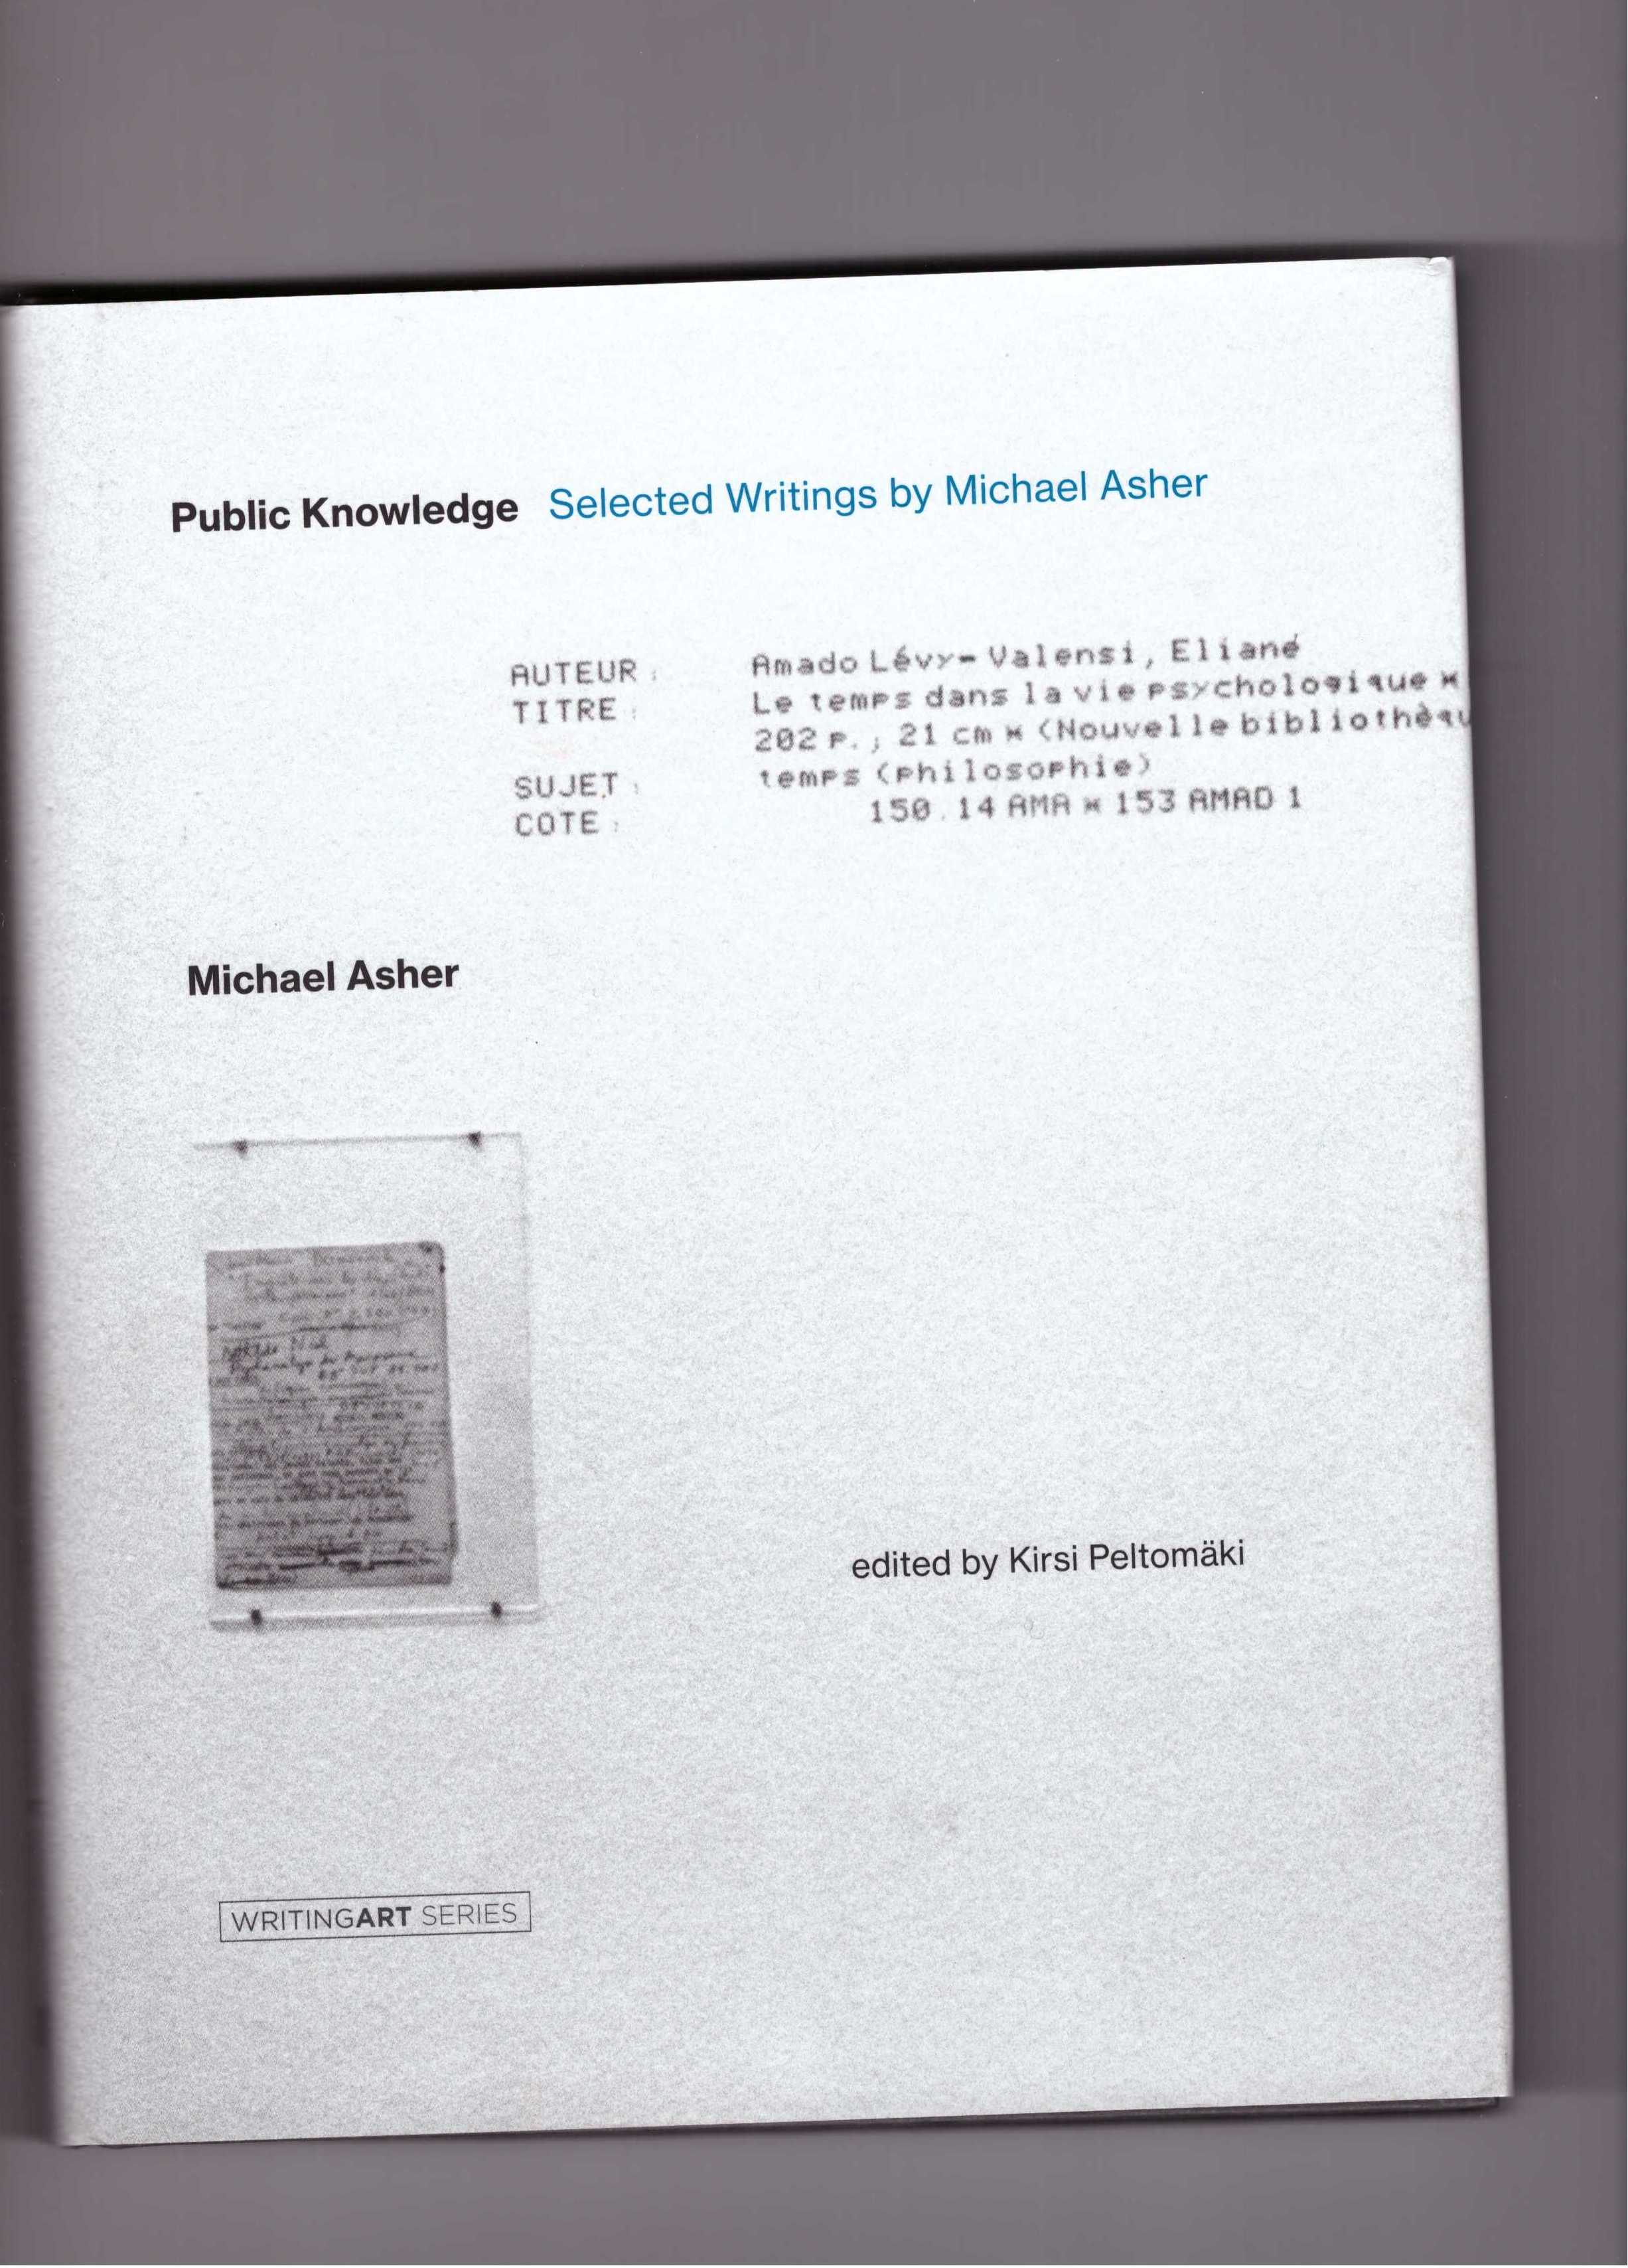 ASHER, Michael; PELTOMÄKI, Kirsi (ed.) - Public Knowledge: Selected Writings by Michael Asher